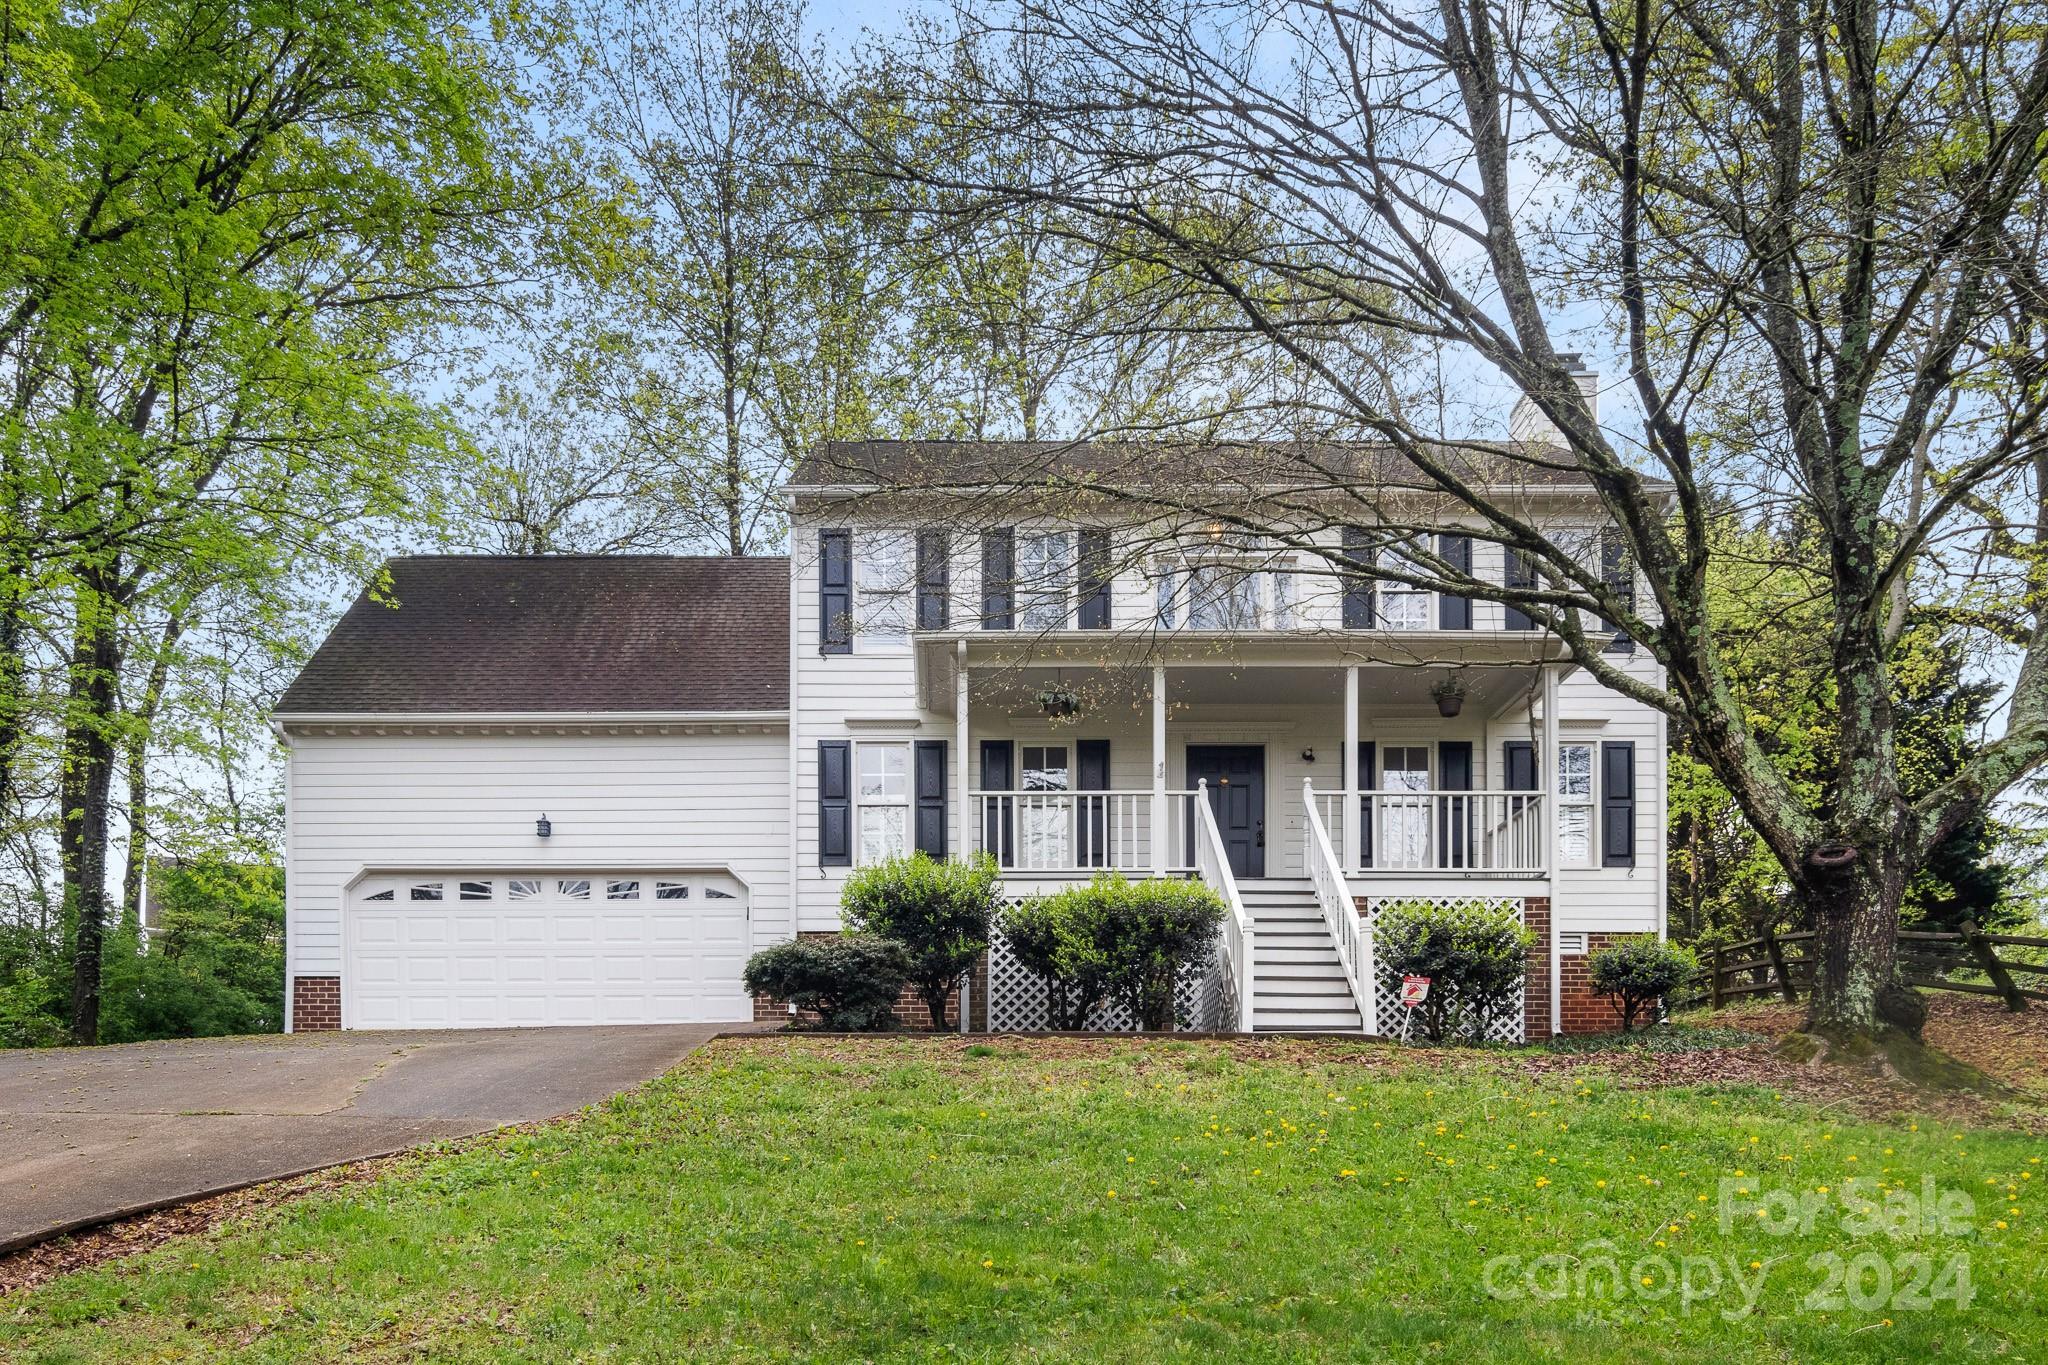 Photo one of 4722 Beech Crest Pl Charlotte NC 28269 | MLS 4128080